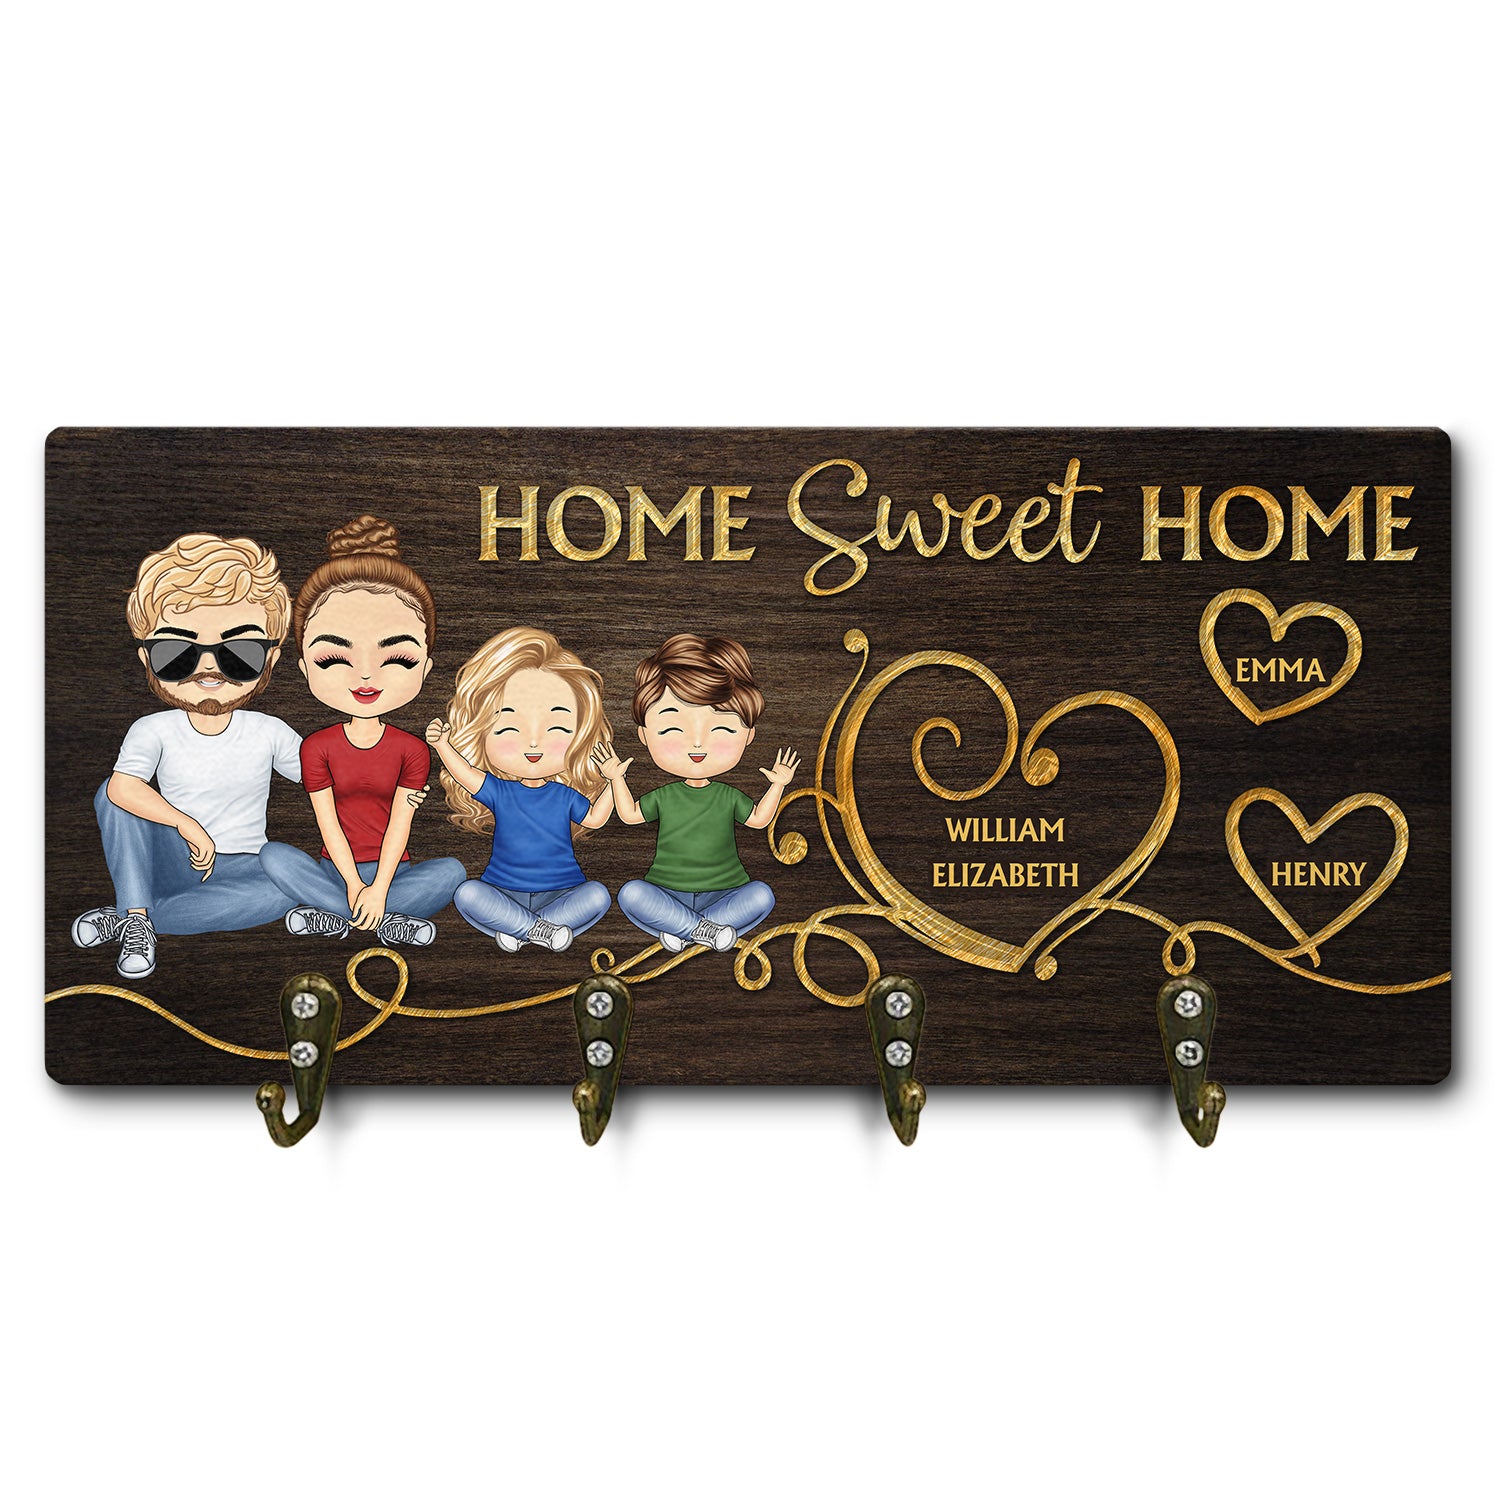 Husband & Wife Home Sweet Home Parents With Kids - Home Decor Gift For Married Couples - Personalized Custom Wood Key Holder